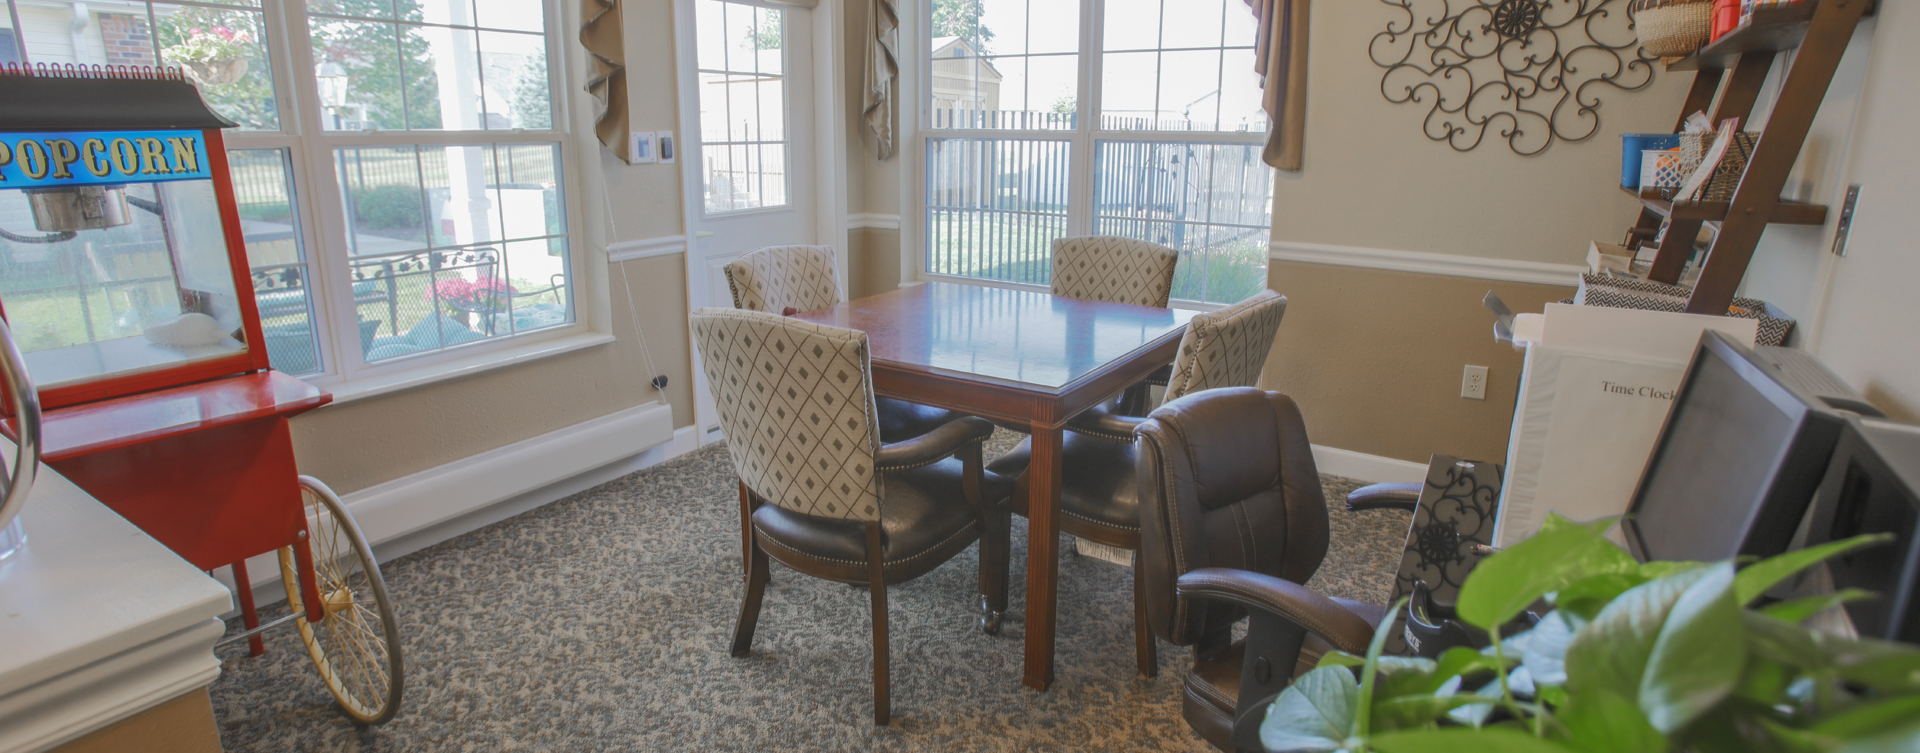 Enjoy the view of the outdoors from the sunroom at Bickford of Crawfordsville